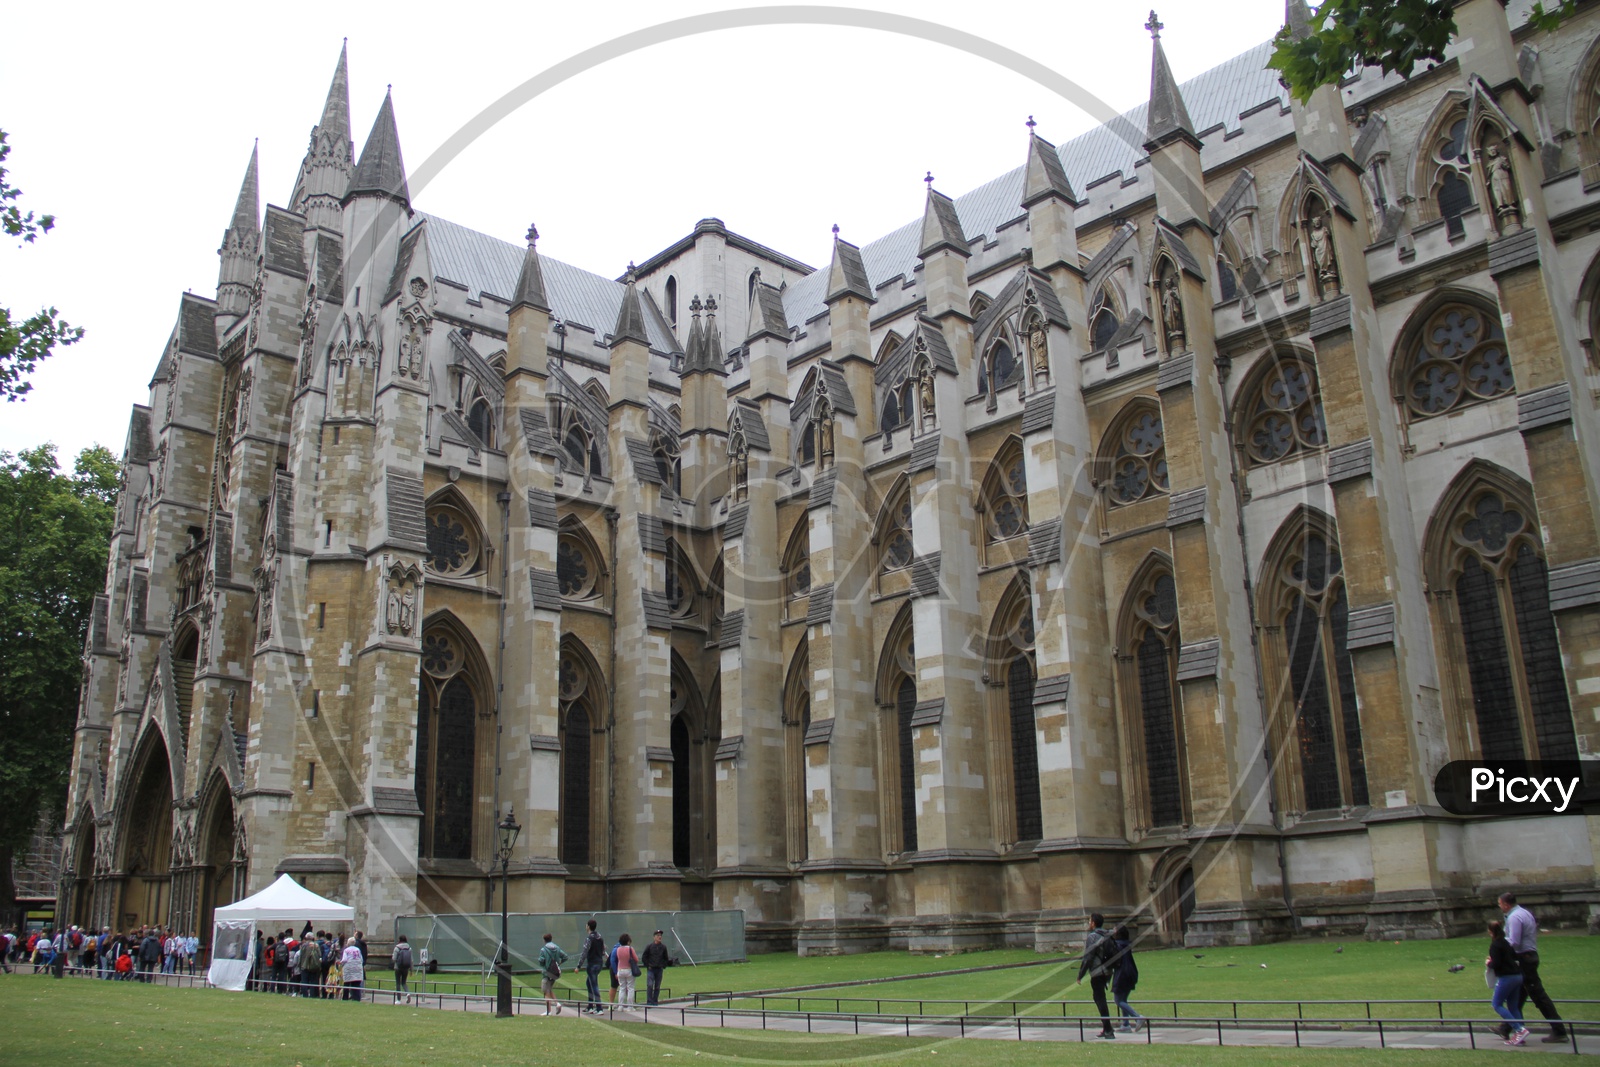 Side View of Westminster Abbey or Collegiate church in London